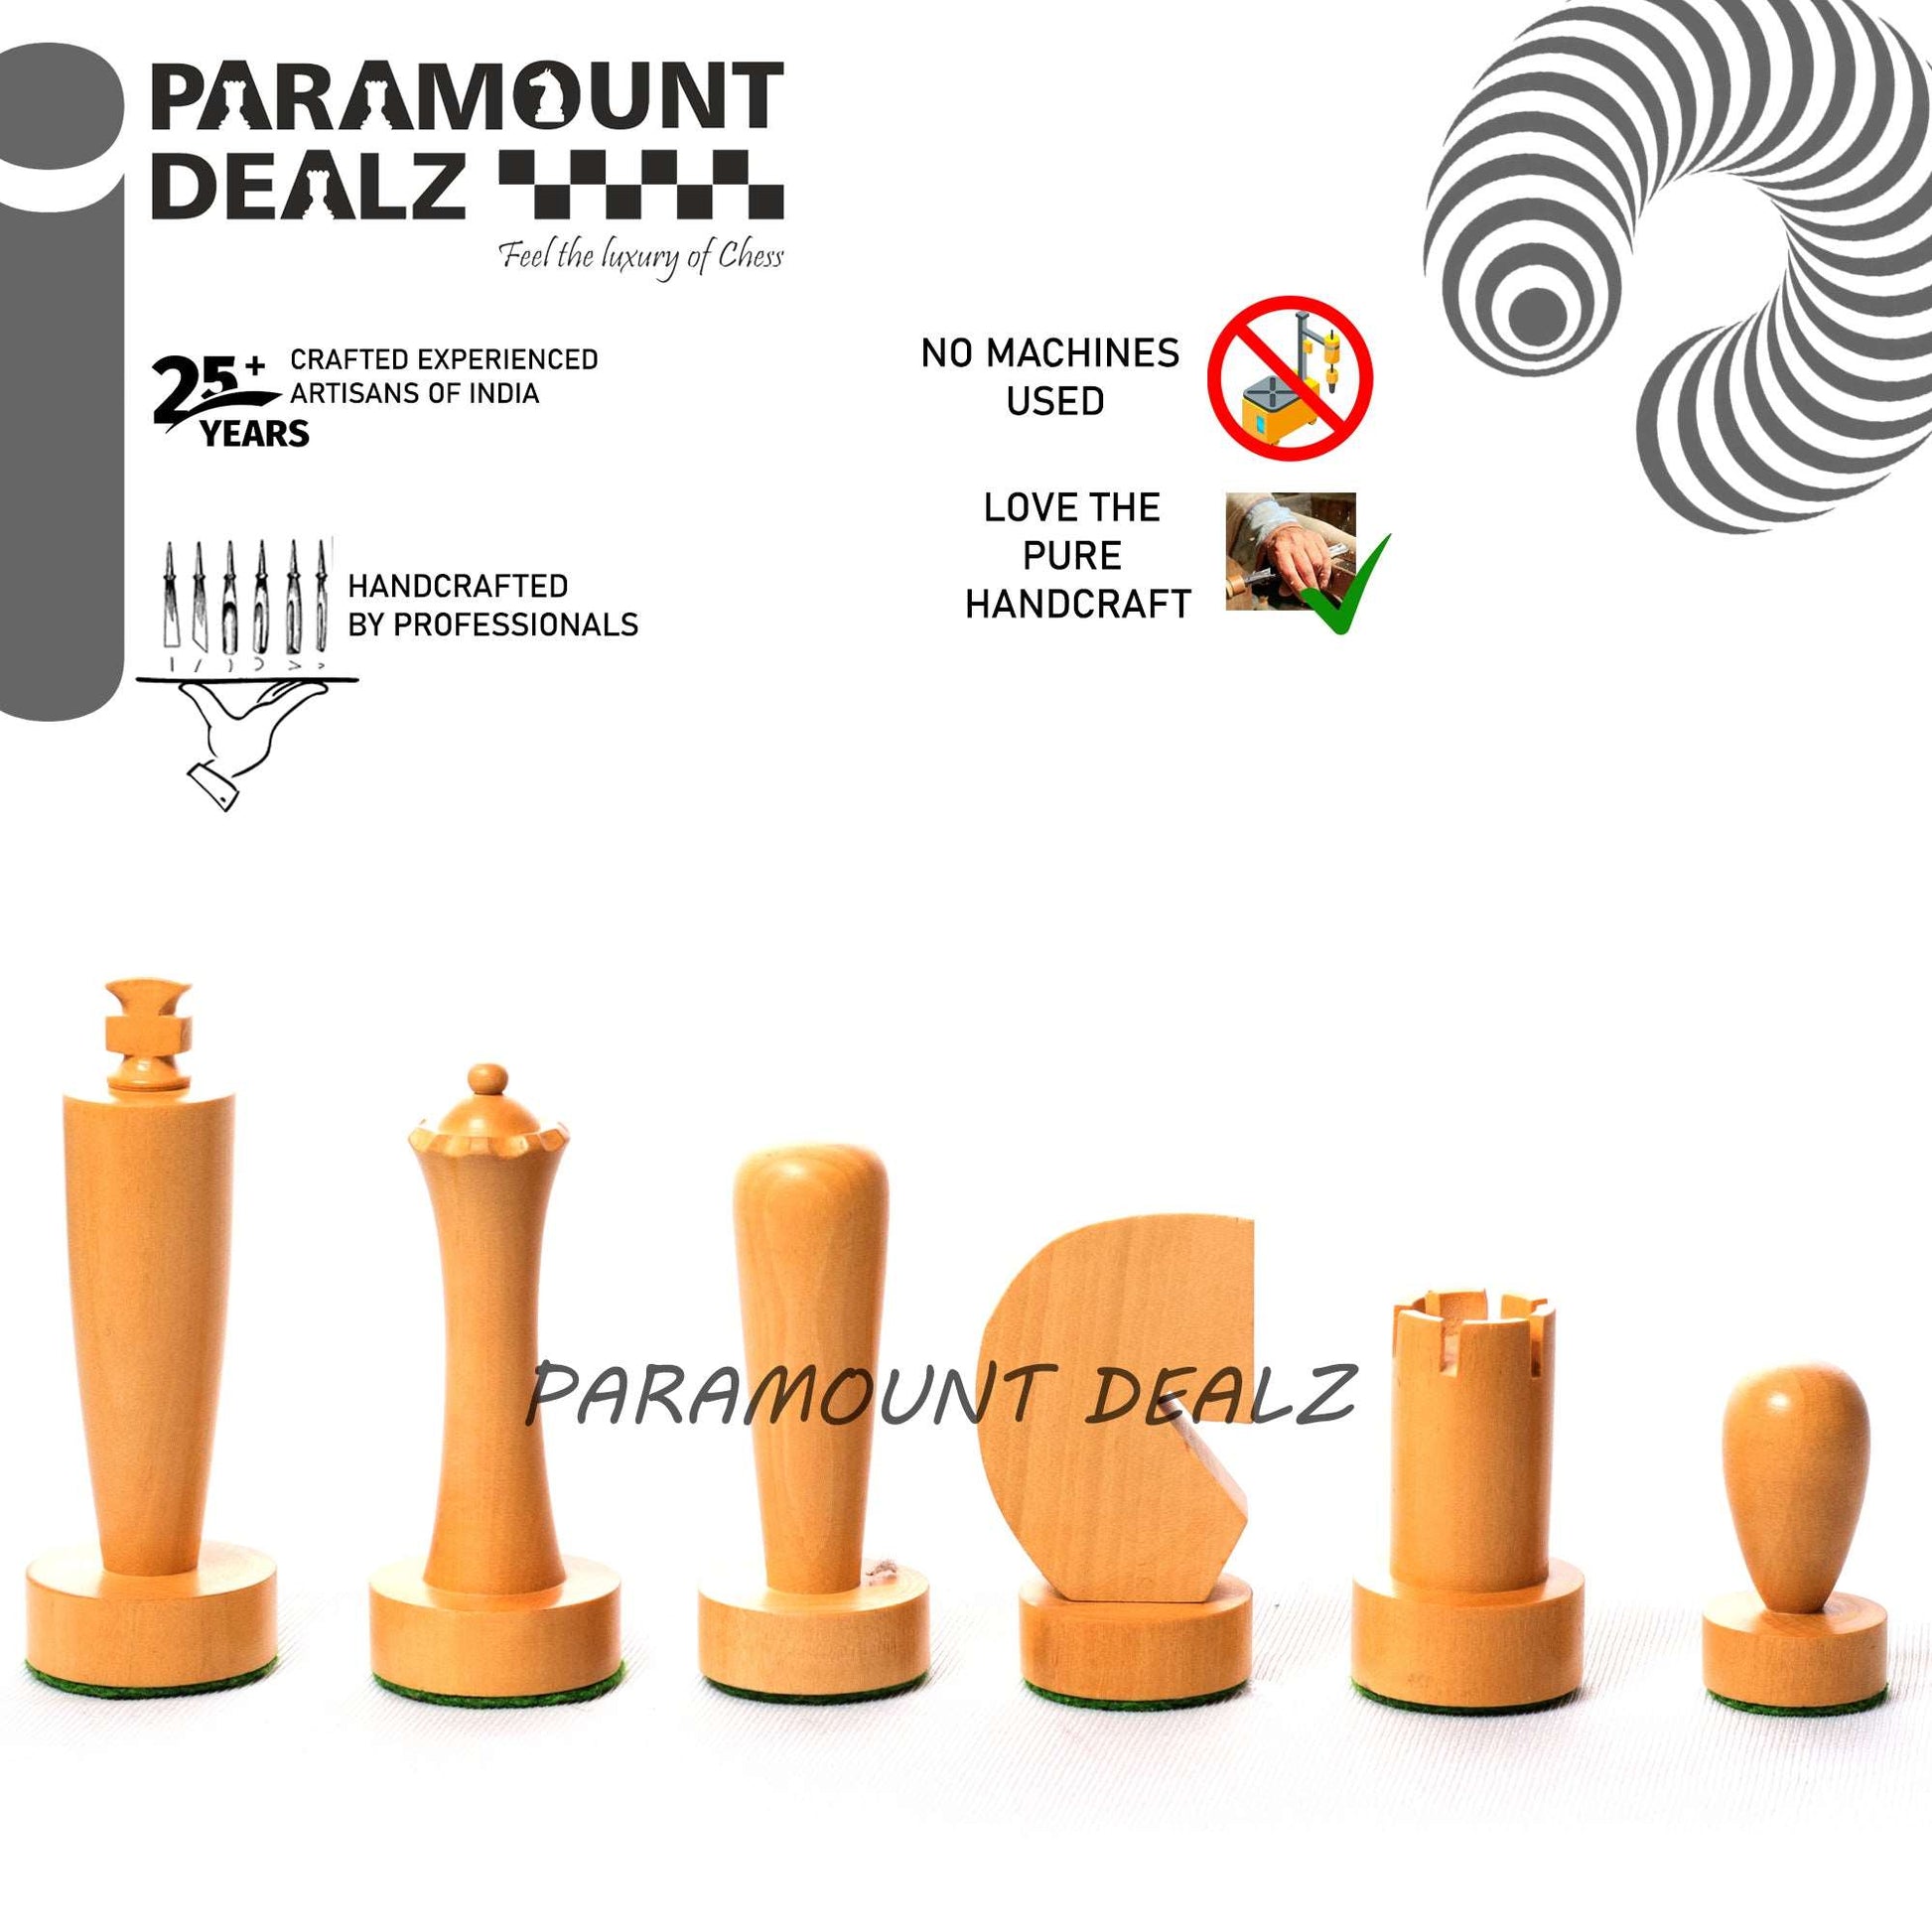 Century series Chess pieces in Indian